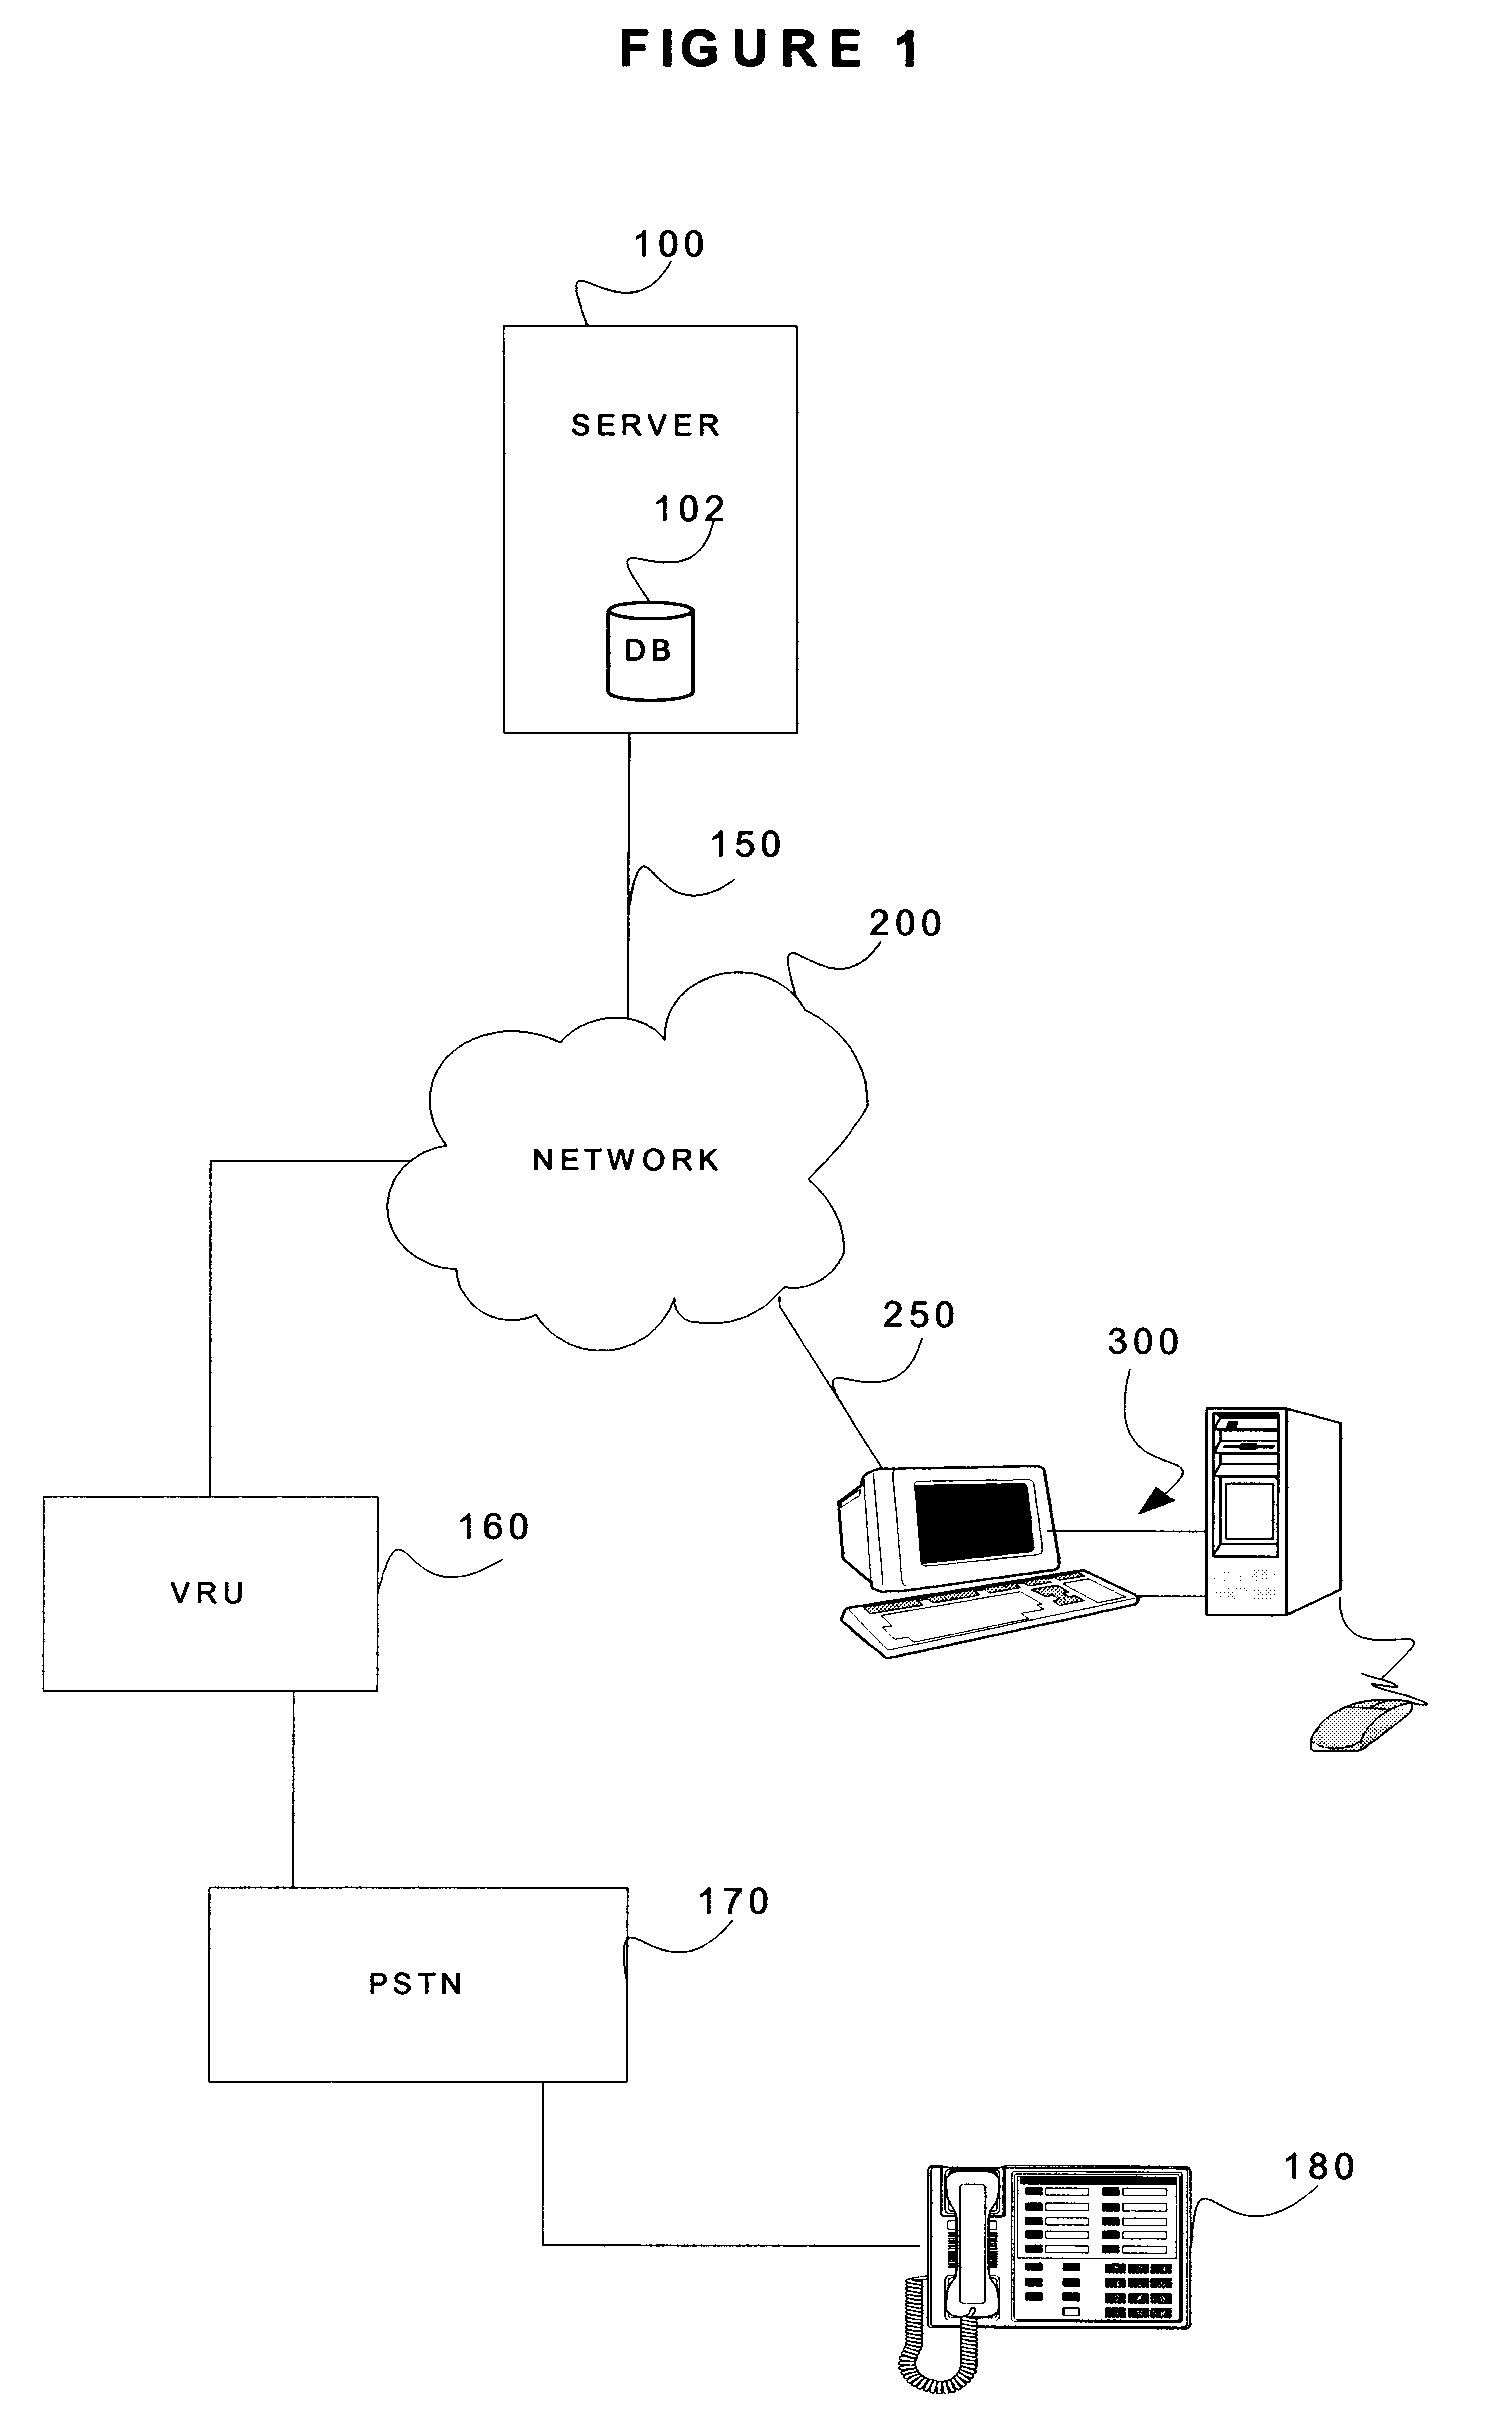 System and Method for Establishing or Modifying an Account With User Selectable Terms